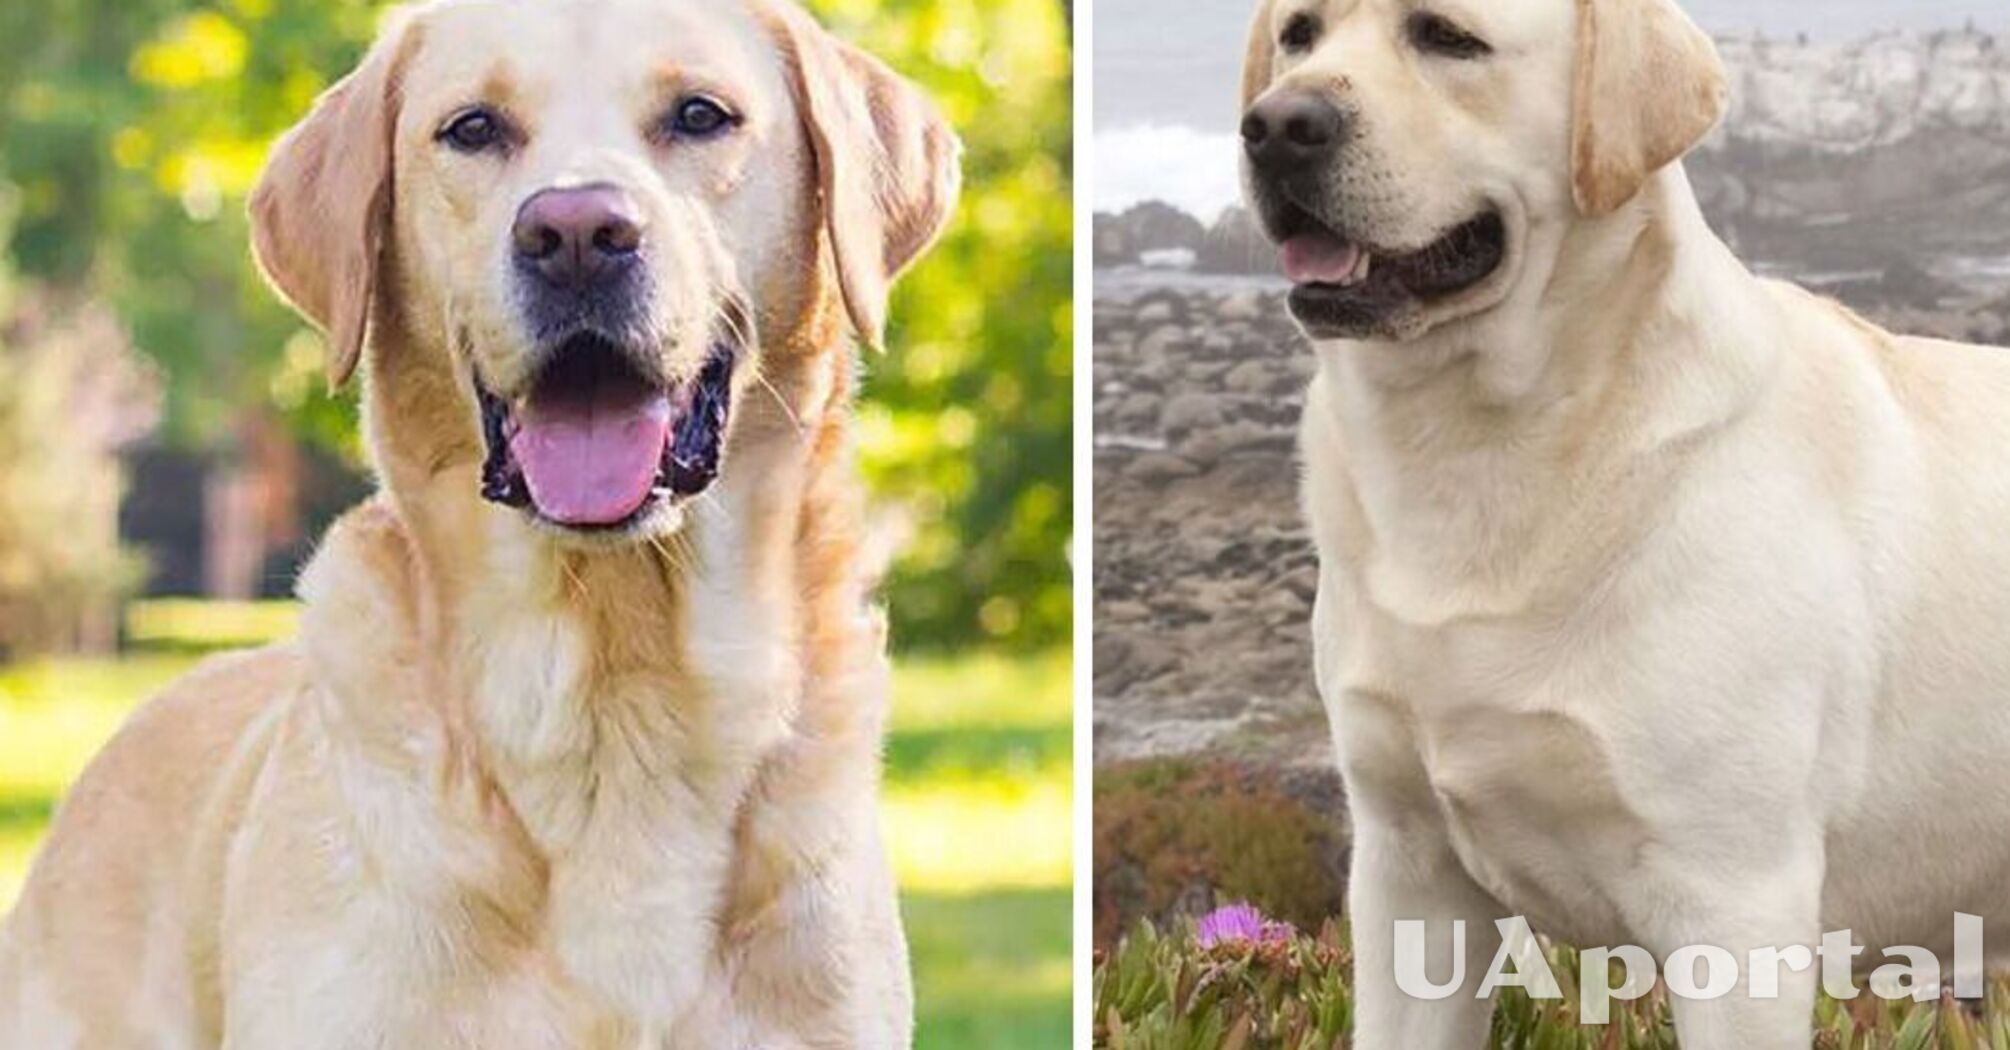 Scientists have found out why Labradors are always hungry and get fat quickly